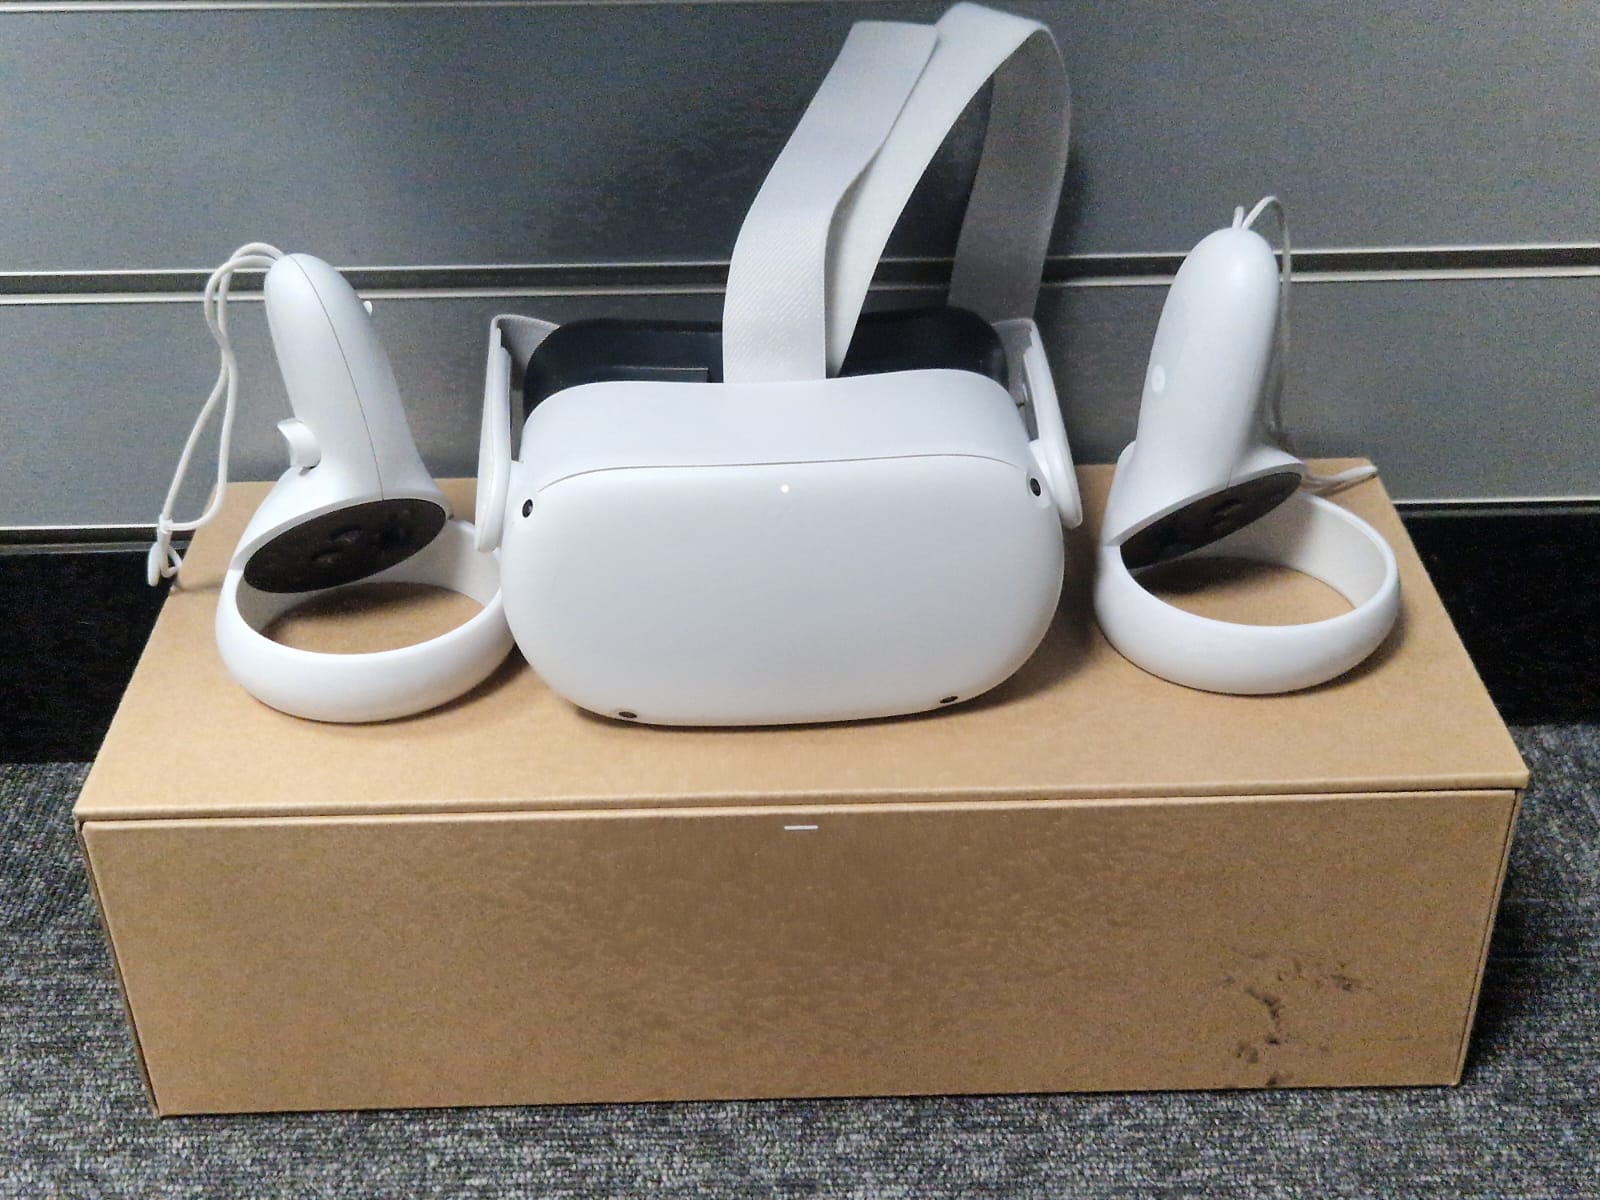 Meta Quest 2 128gb VR headset -Boxed